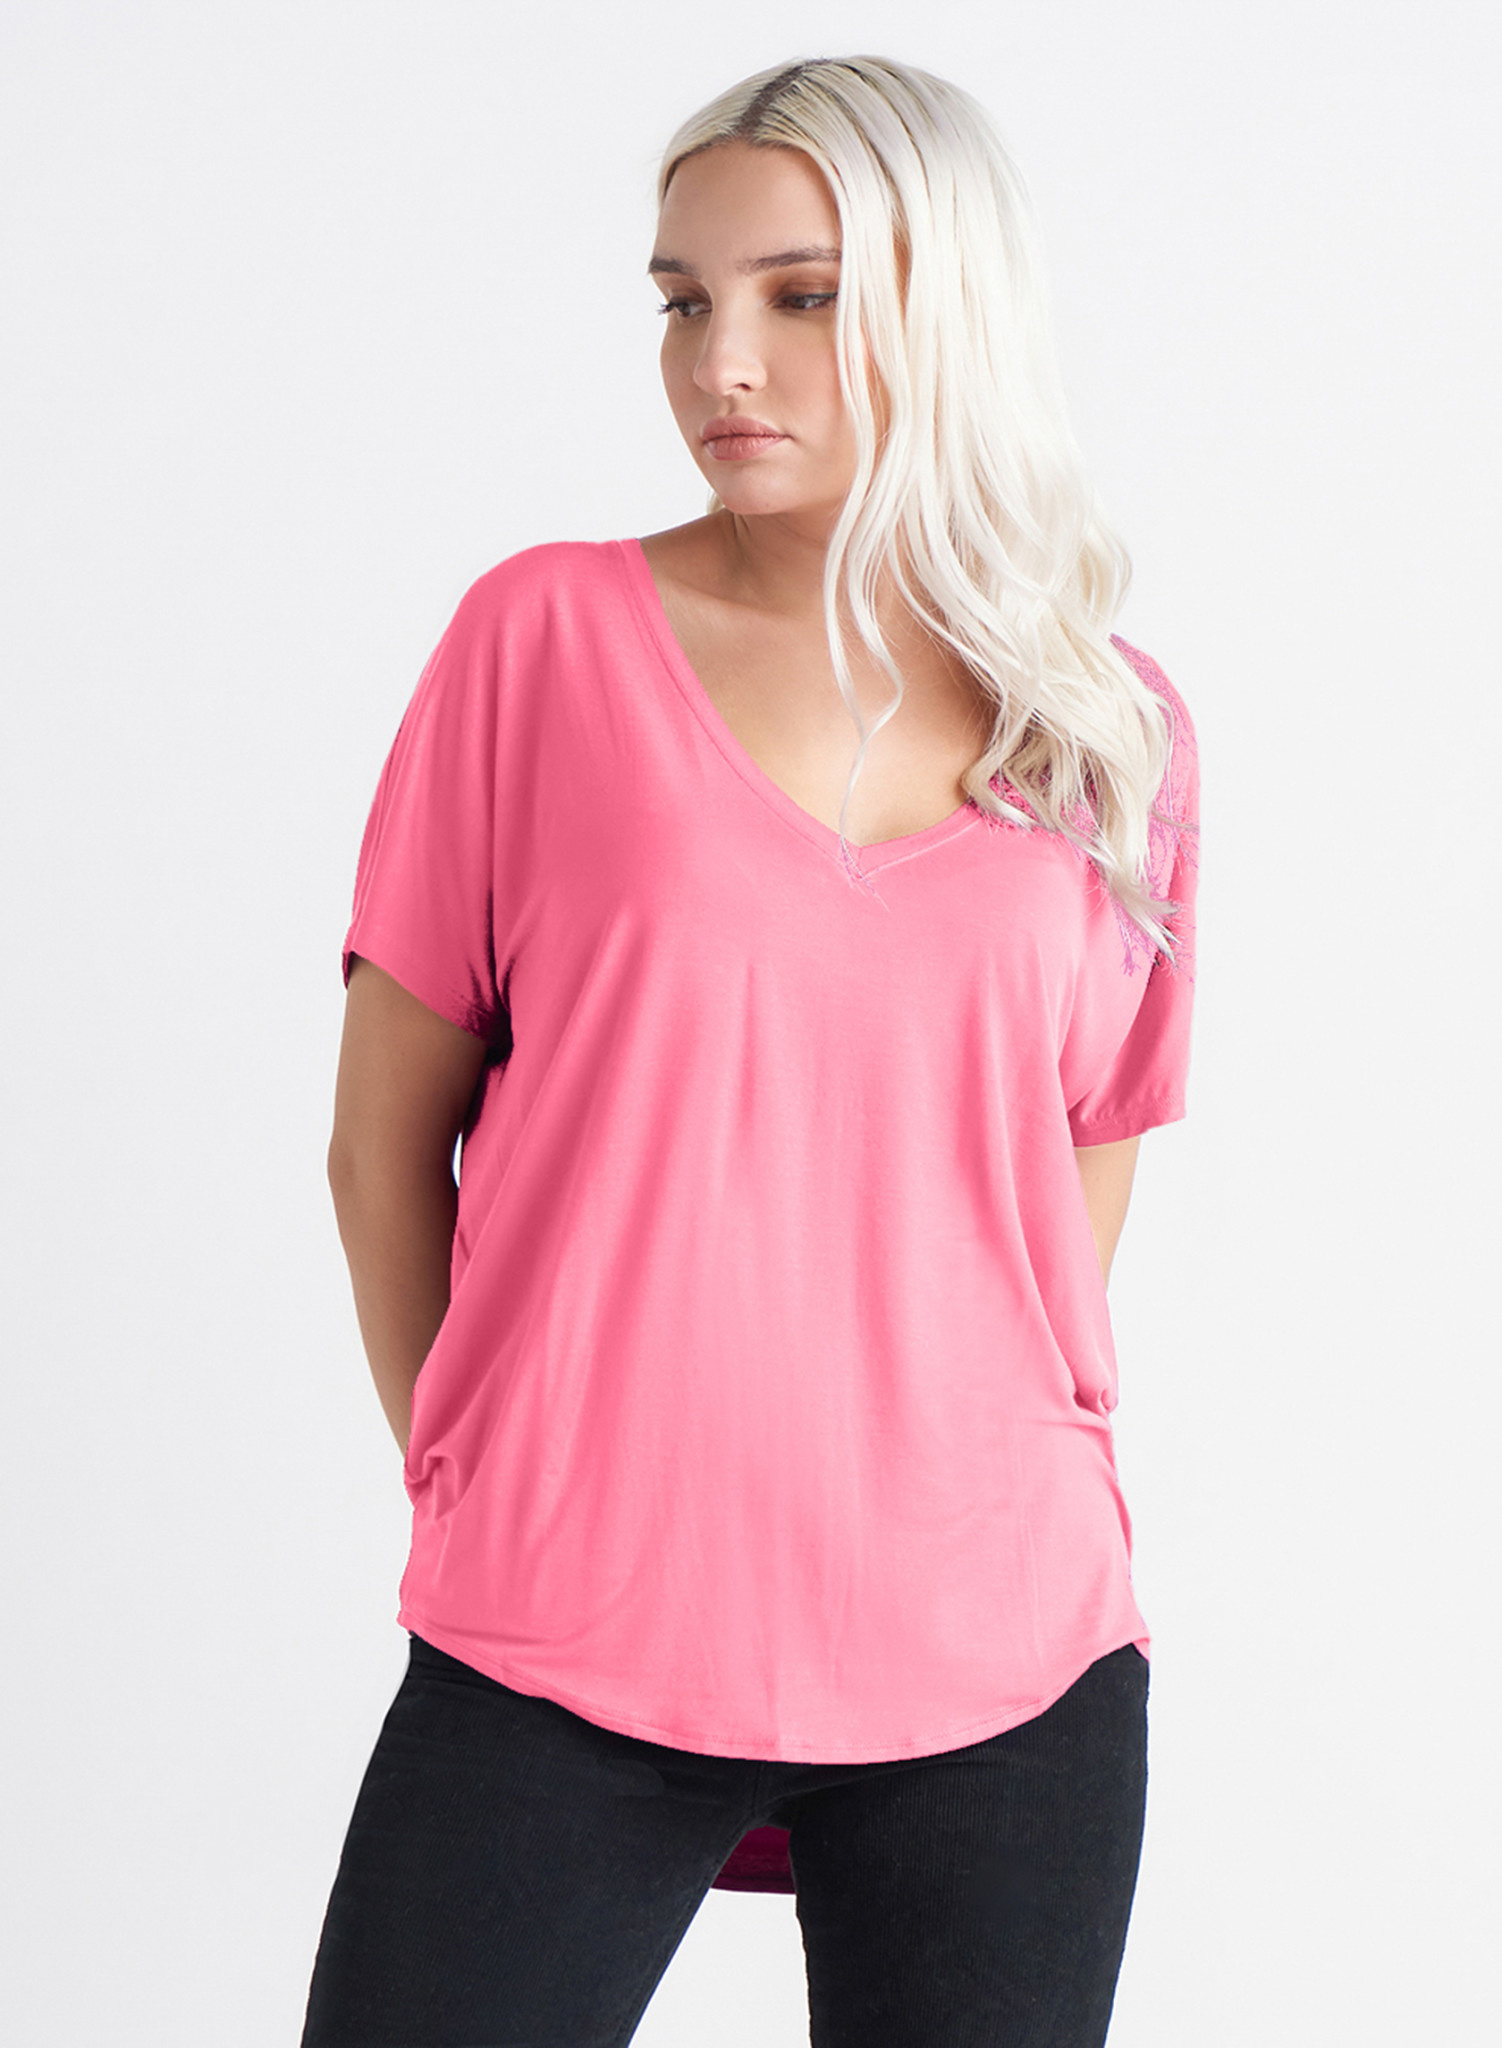 Hot Pink Tee - Thelma & Thistle